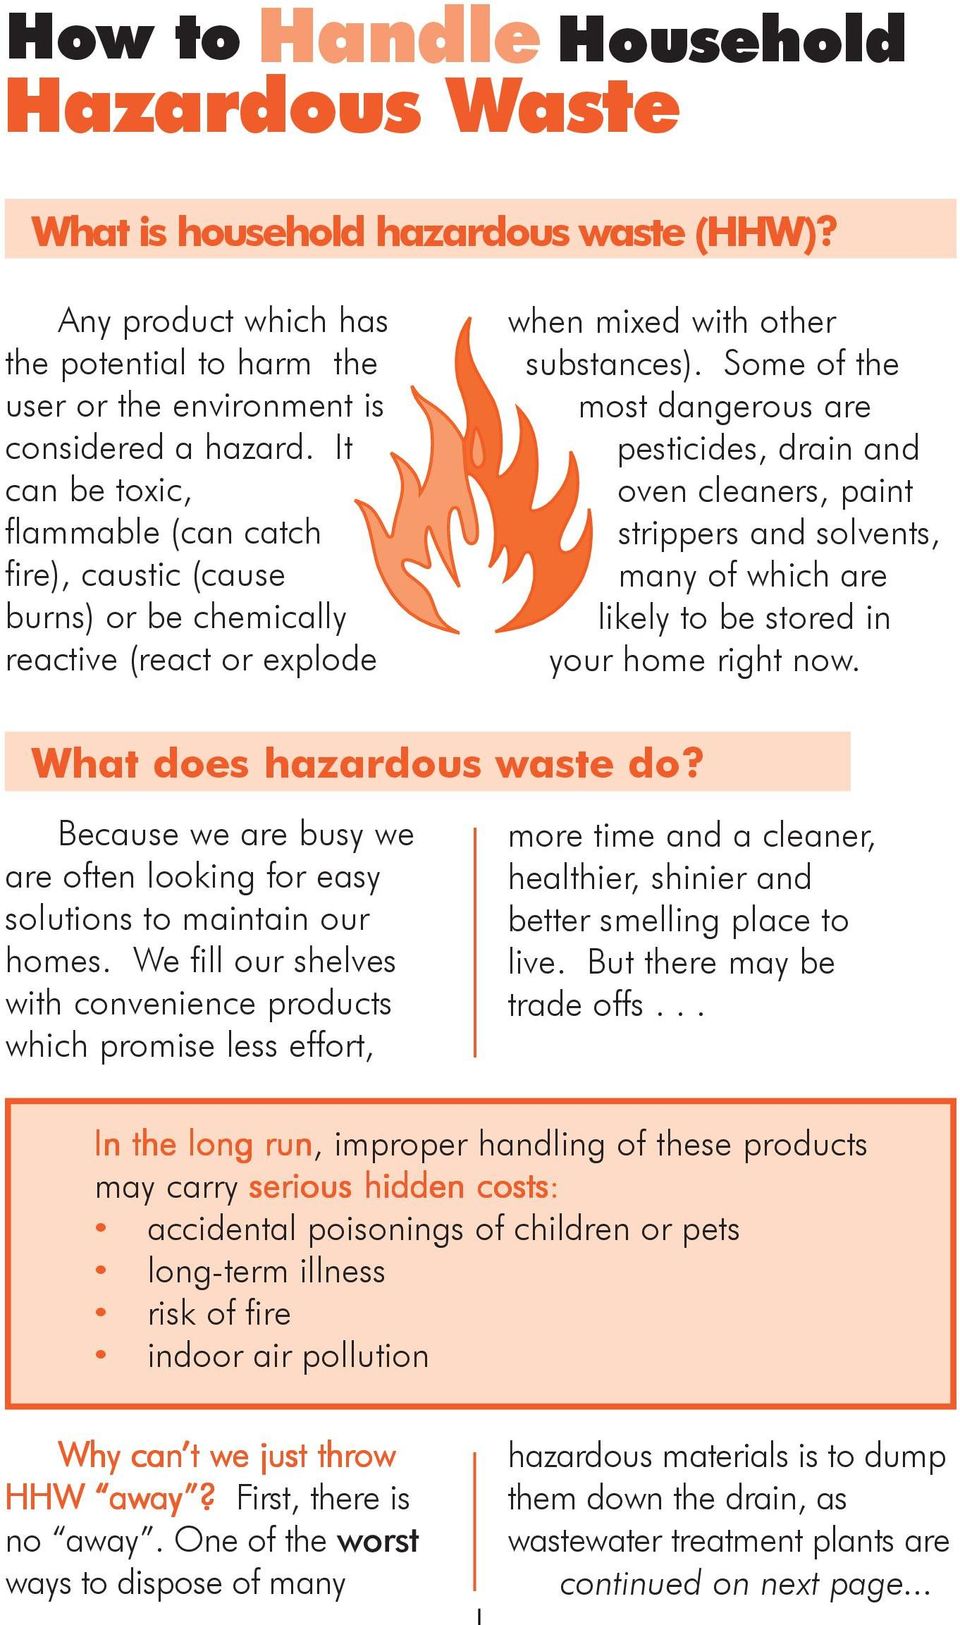 Some of the most dangerous are pesticides, drain and oven, paint strippers and solvents, many of which are likely to be stored in your home right now. What does hazardous waste do?